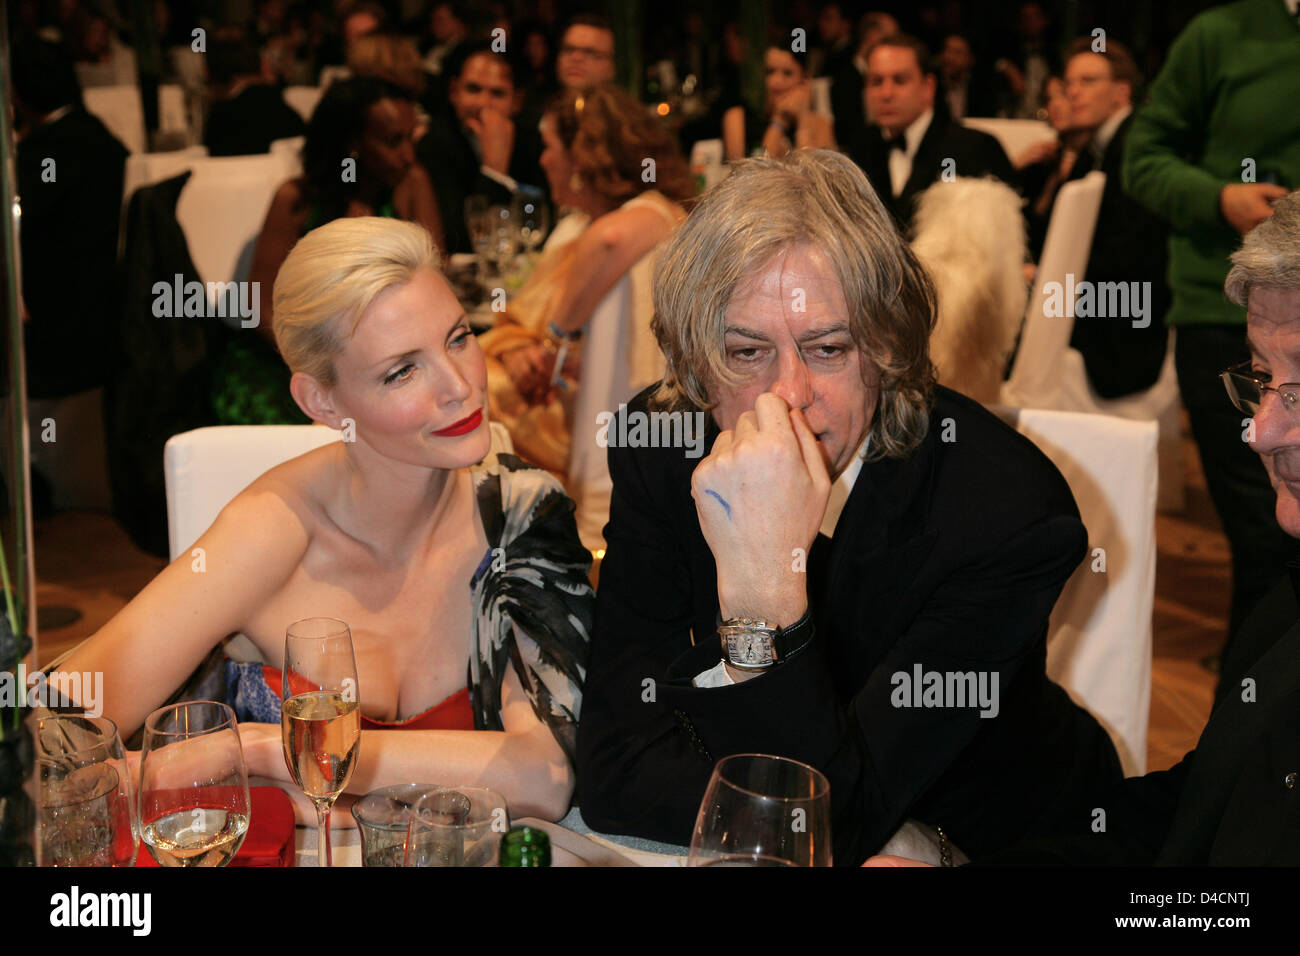 Irish musician and activist Bob Geldof (R) and German supermodel Nadja Auermann, have a drink at the charity gala 'Cinema for Peace' in Berlin, Germany, 11 February 2008. The annual charity event takes place in the course of the 58th Berlinale. Photo: Jens Kalaene Stock Photo